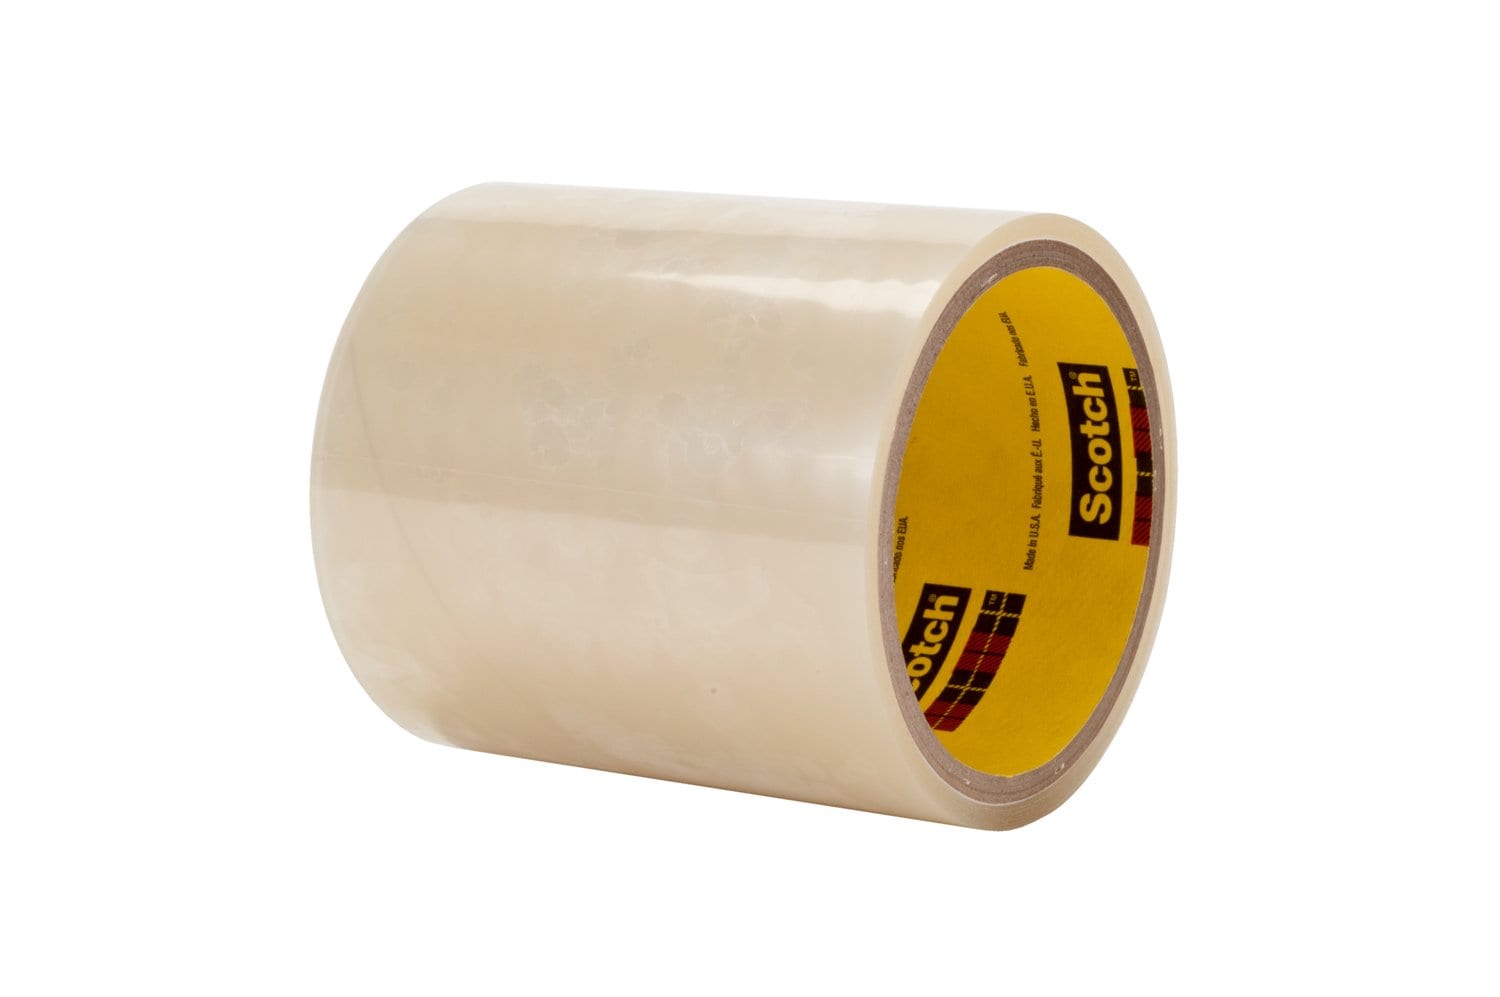 7000123564 - 3M Adhesive Transfer Tape 467MP, Clear, 16 in x 180 yd, 2 mil, 1 roll
per case